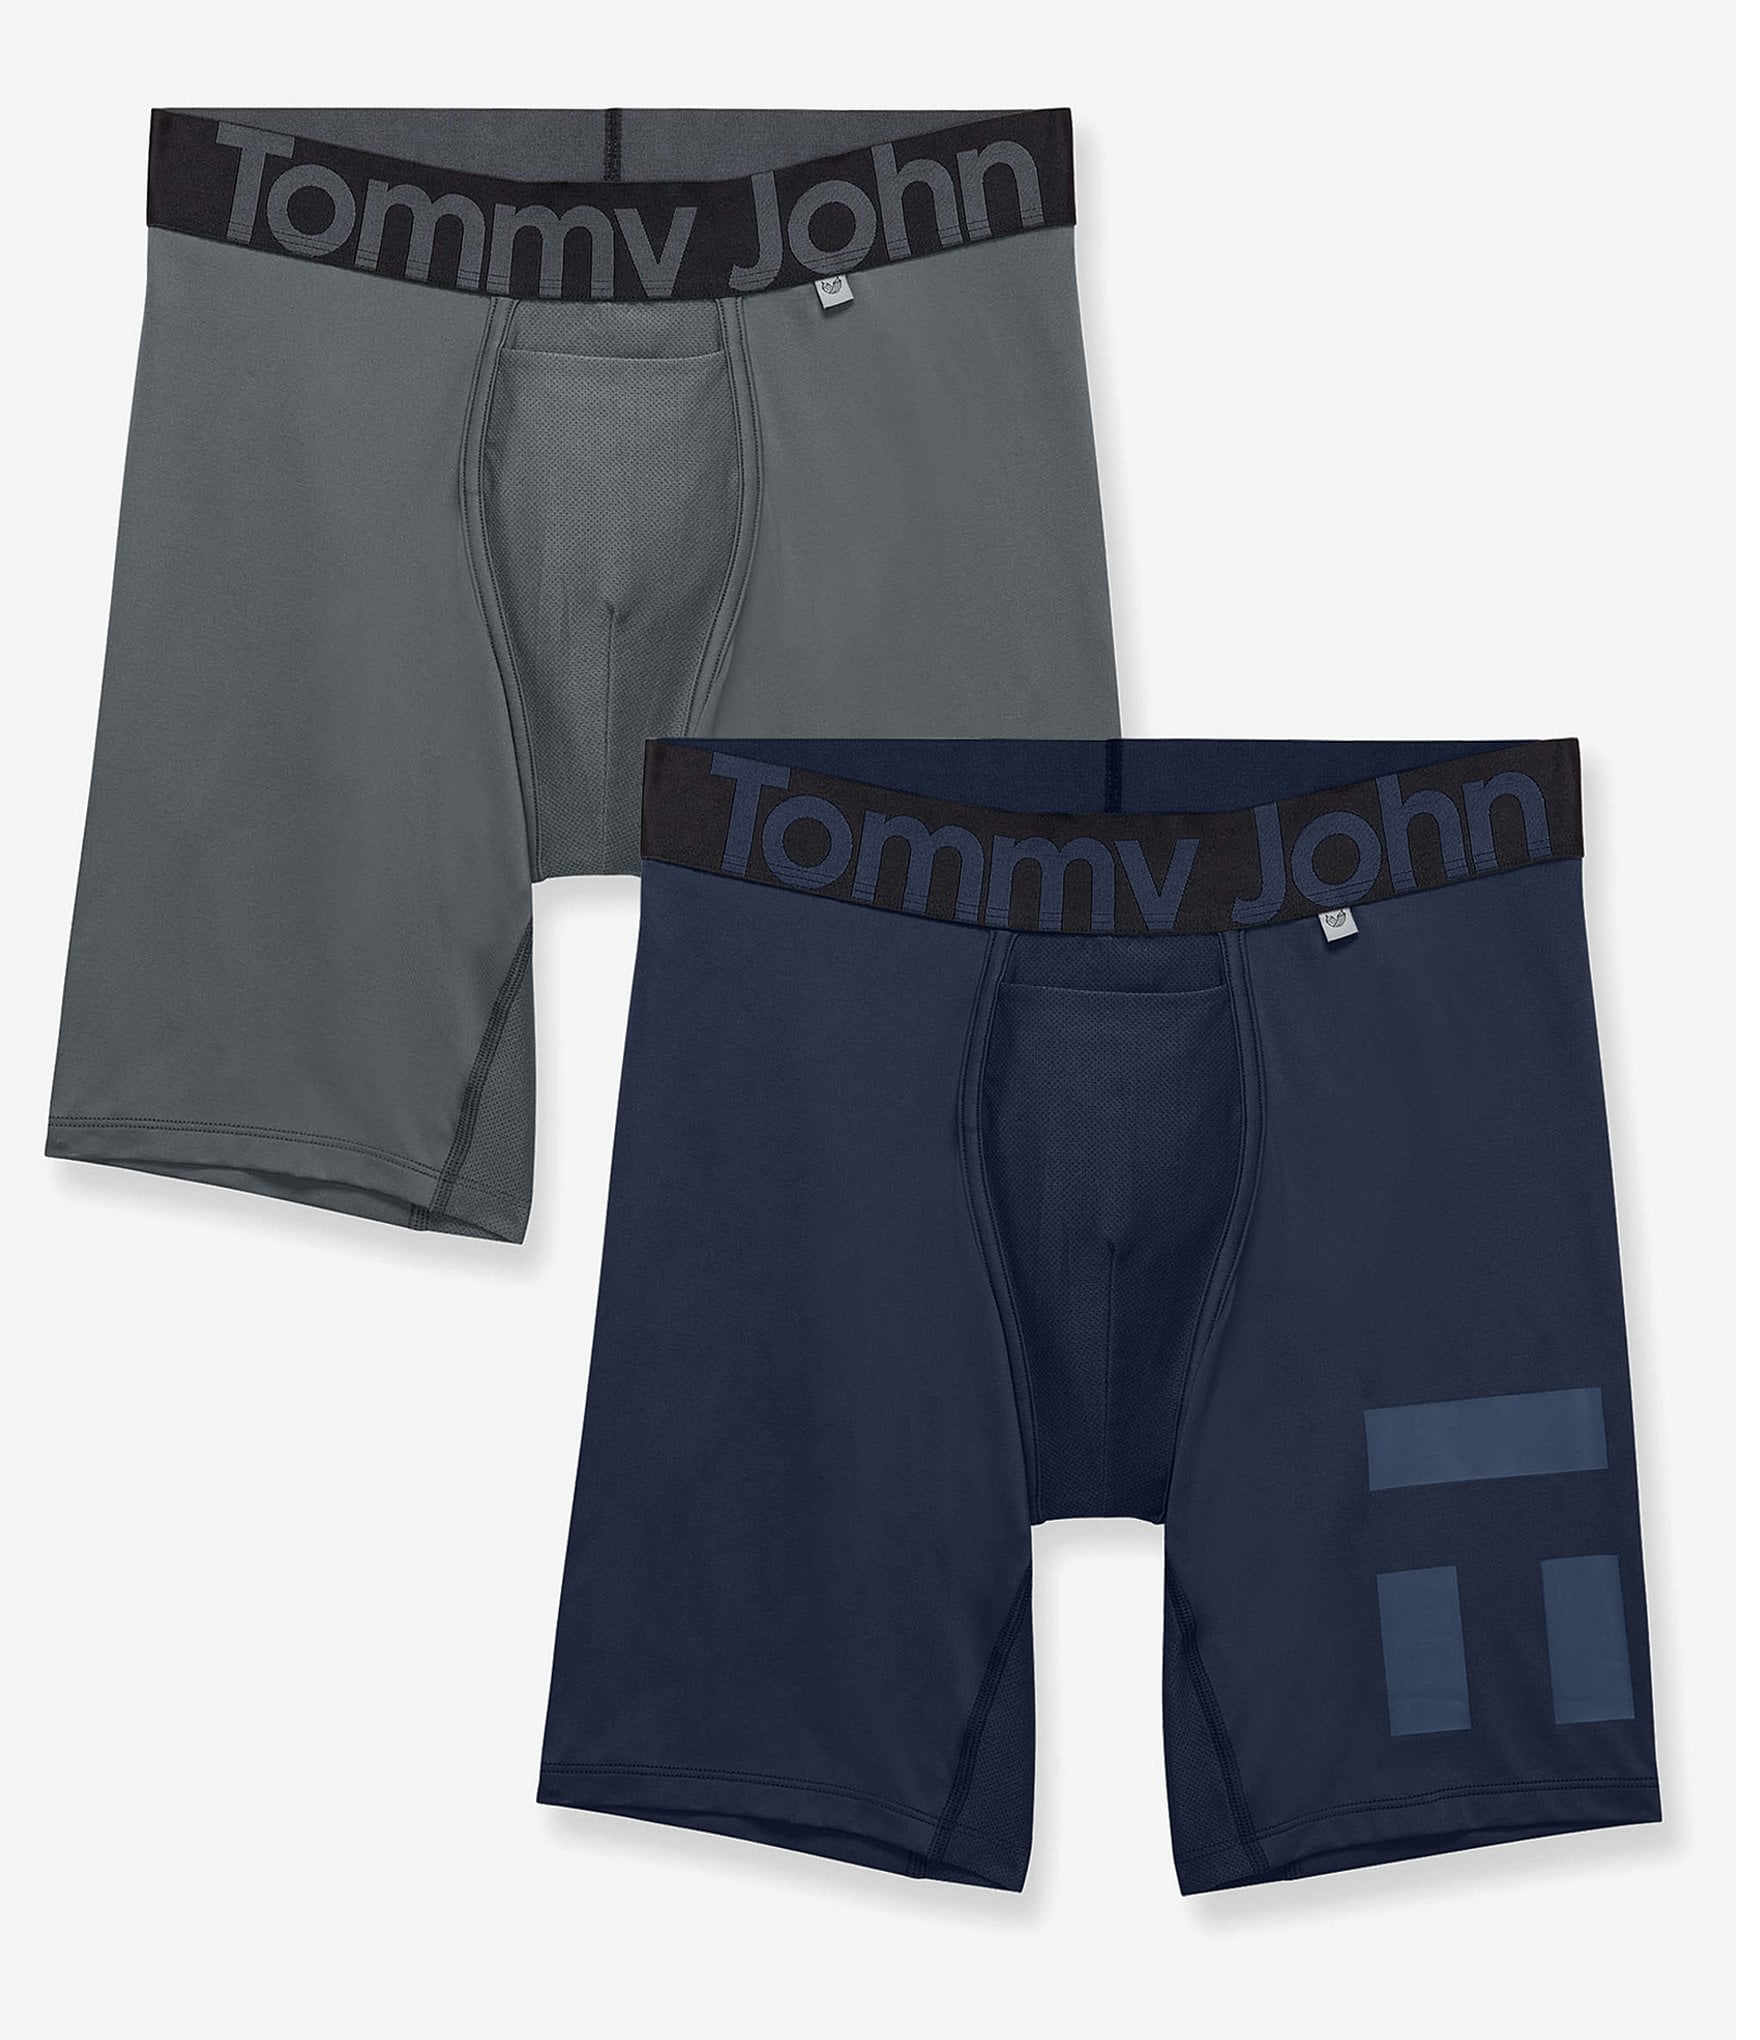 Tommy John MenAs Underwear - cool cotton Trunk with contour Pouch and  Shorter 4 Inseam - comfortable, Breathable Underwear, 3 Pack (BlackIron